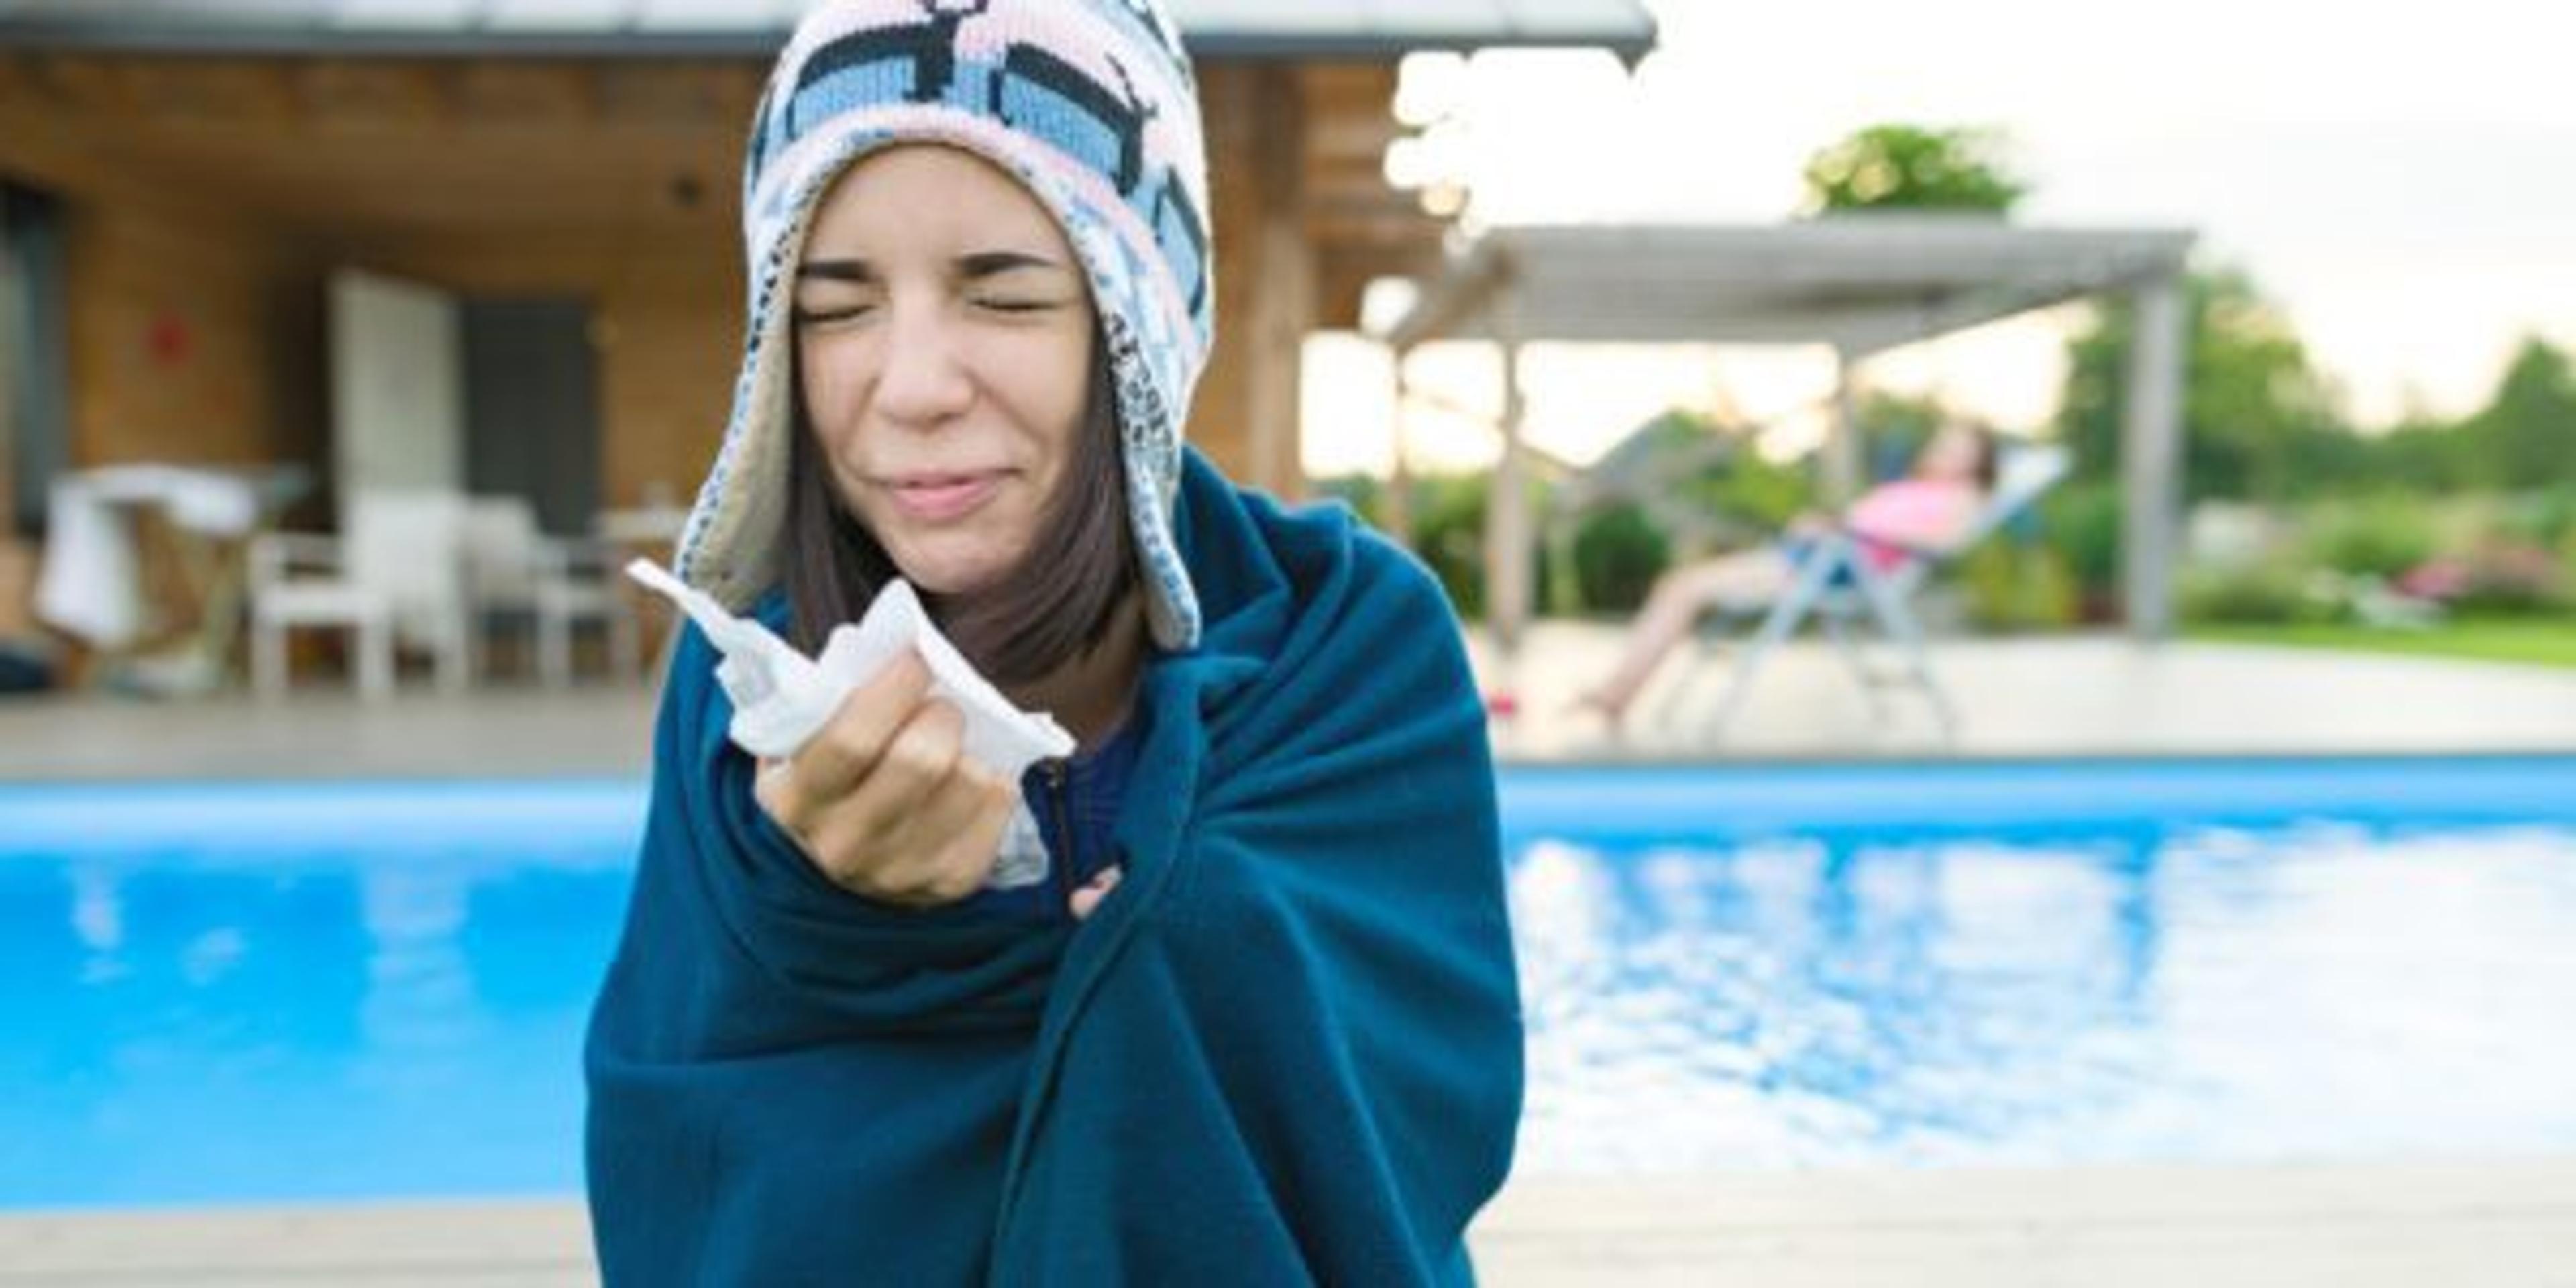 Flu, colds in the summer. Girl in a knitted hat with plaid with handkerchief sneezes, wipes her nose. Background nature, pool, girl in chaise longue